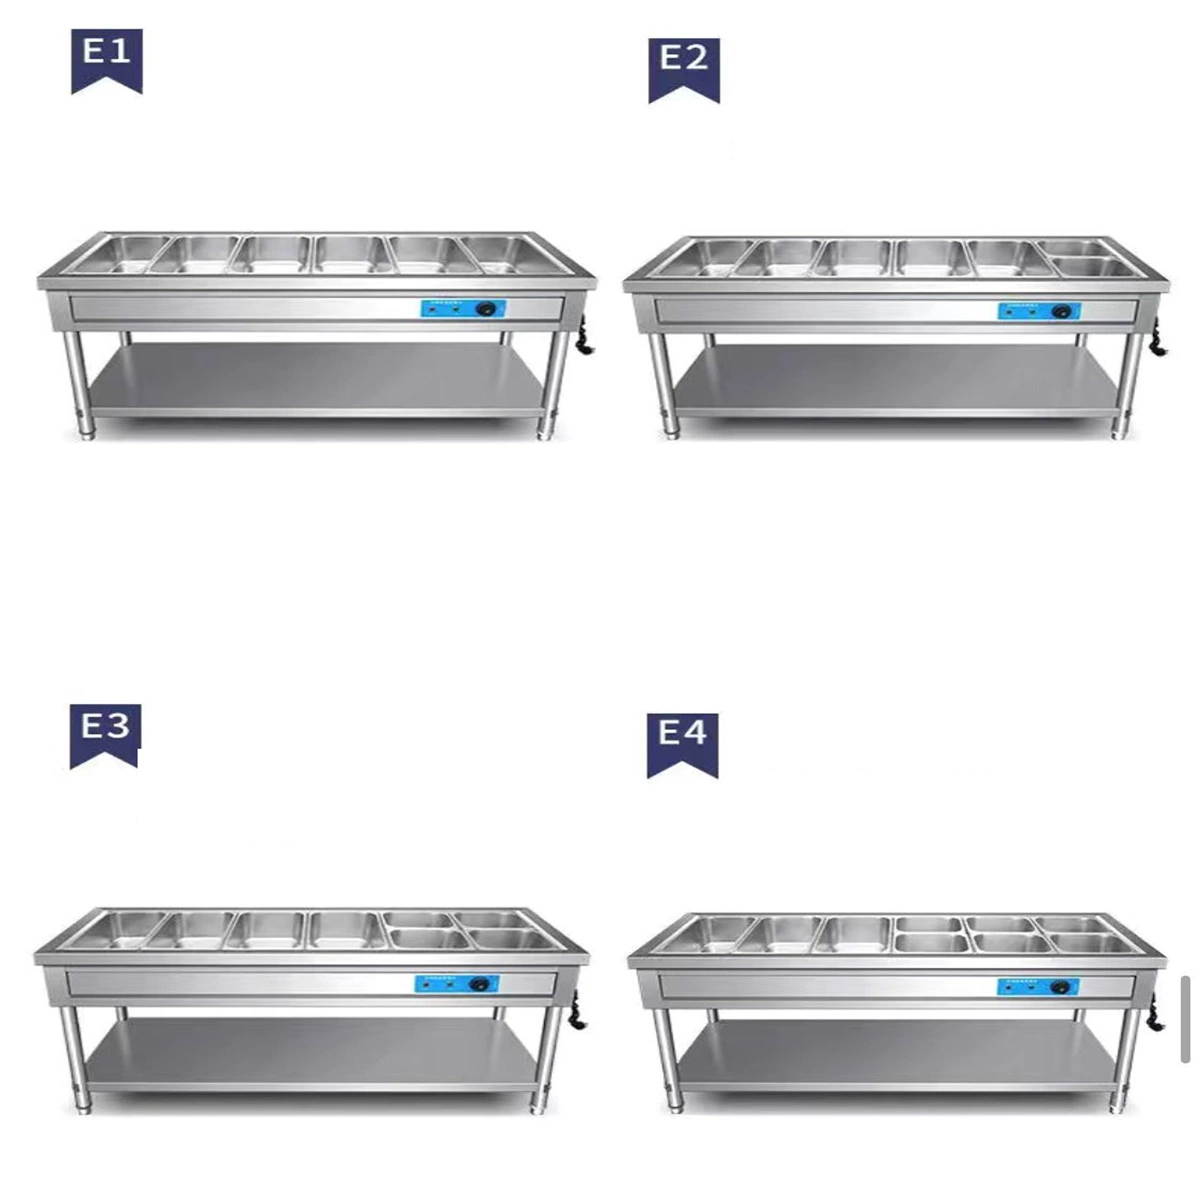 Bain Marie Commerical Electric Buffet Countertop Food Warmer 3 Wells with Glass Chafing Dishes